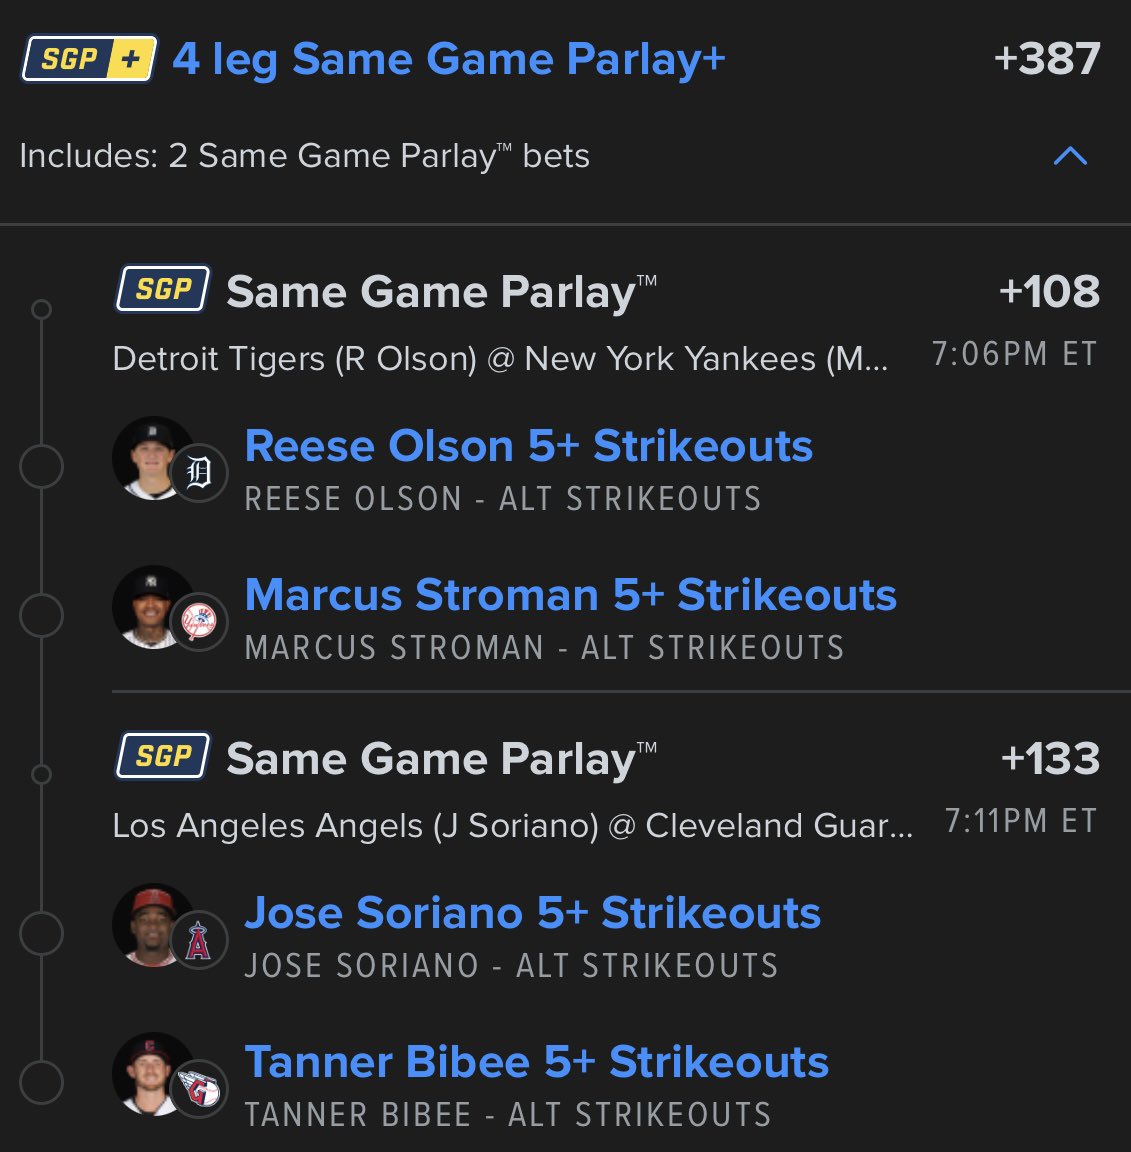 We’ll try some K parlays today 🤷🏼‍♂️ #lgm #Atobttr #tothecore #ringthebell #natitude #letsgobucs #youhavetoseeit #thisismycrew